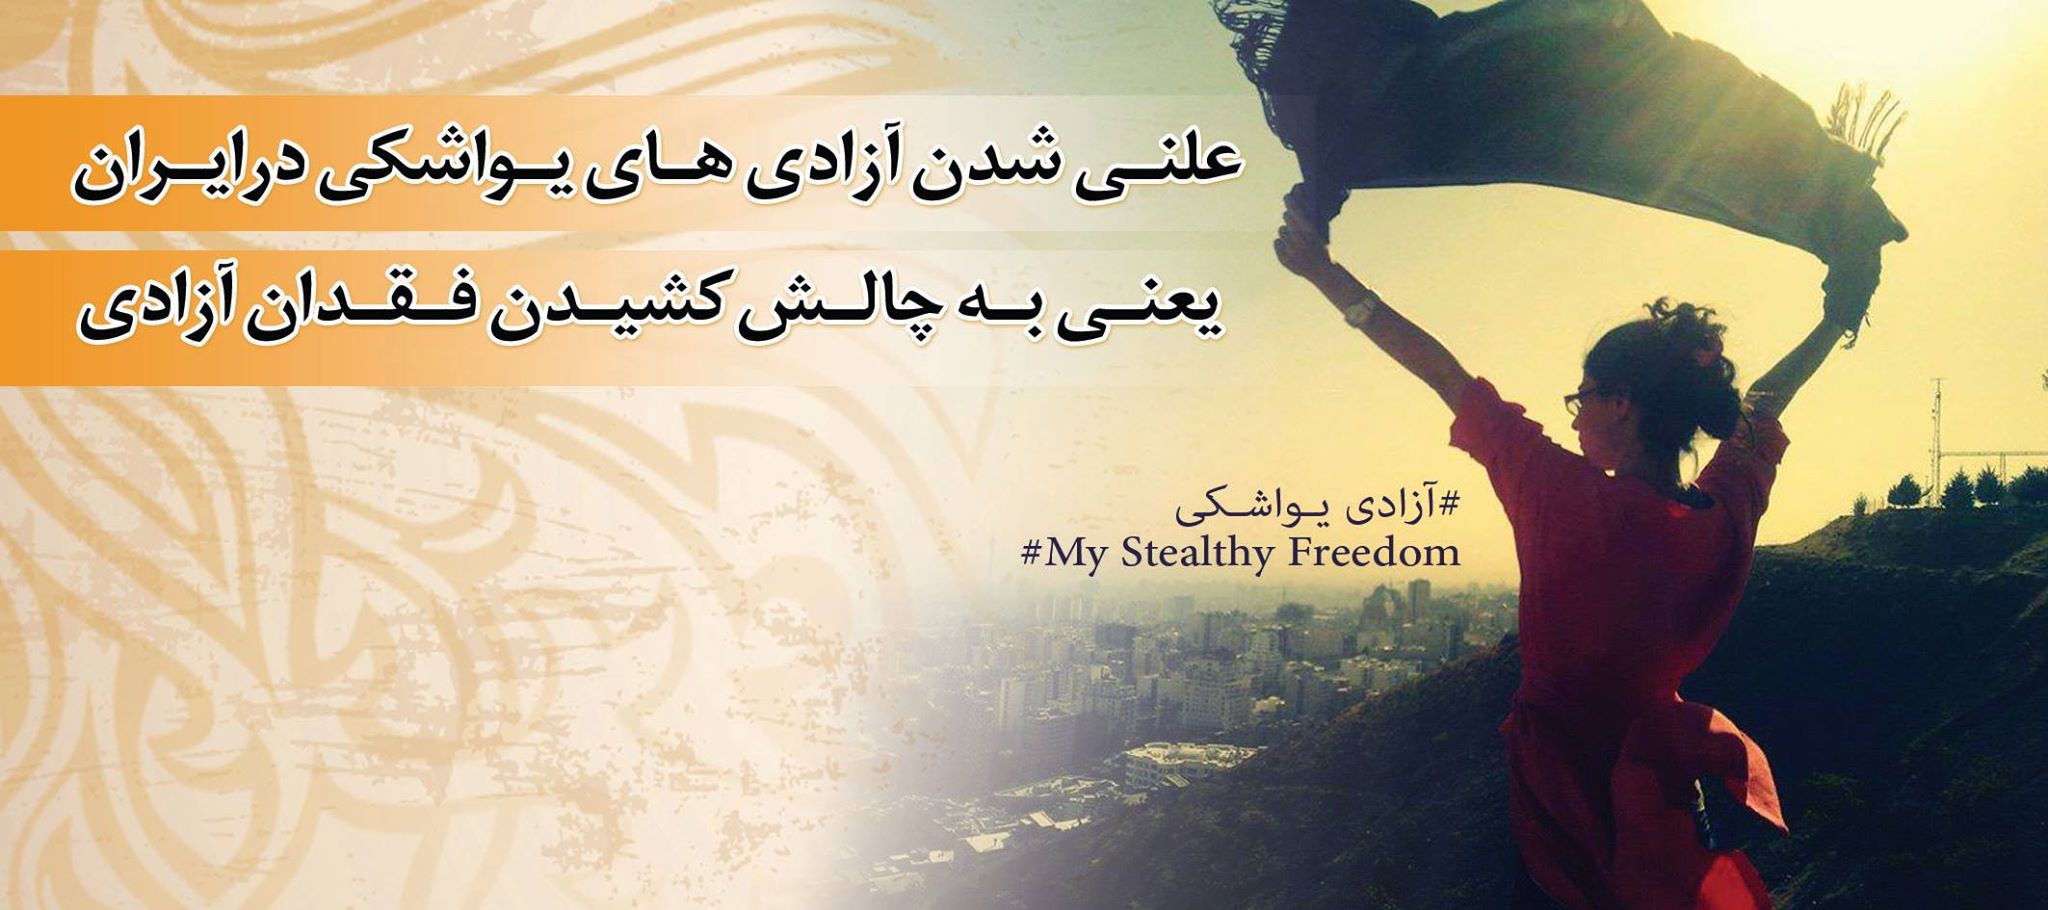 The cover photo from Masih Alinejad's Facebook page "My Stealthy Freedom"